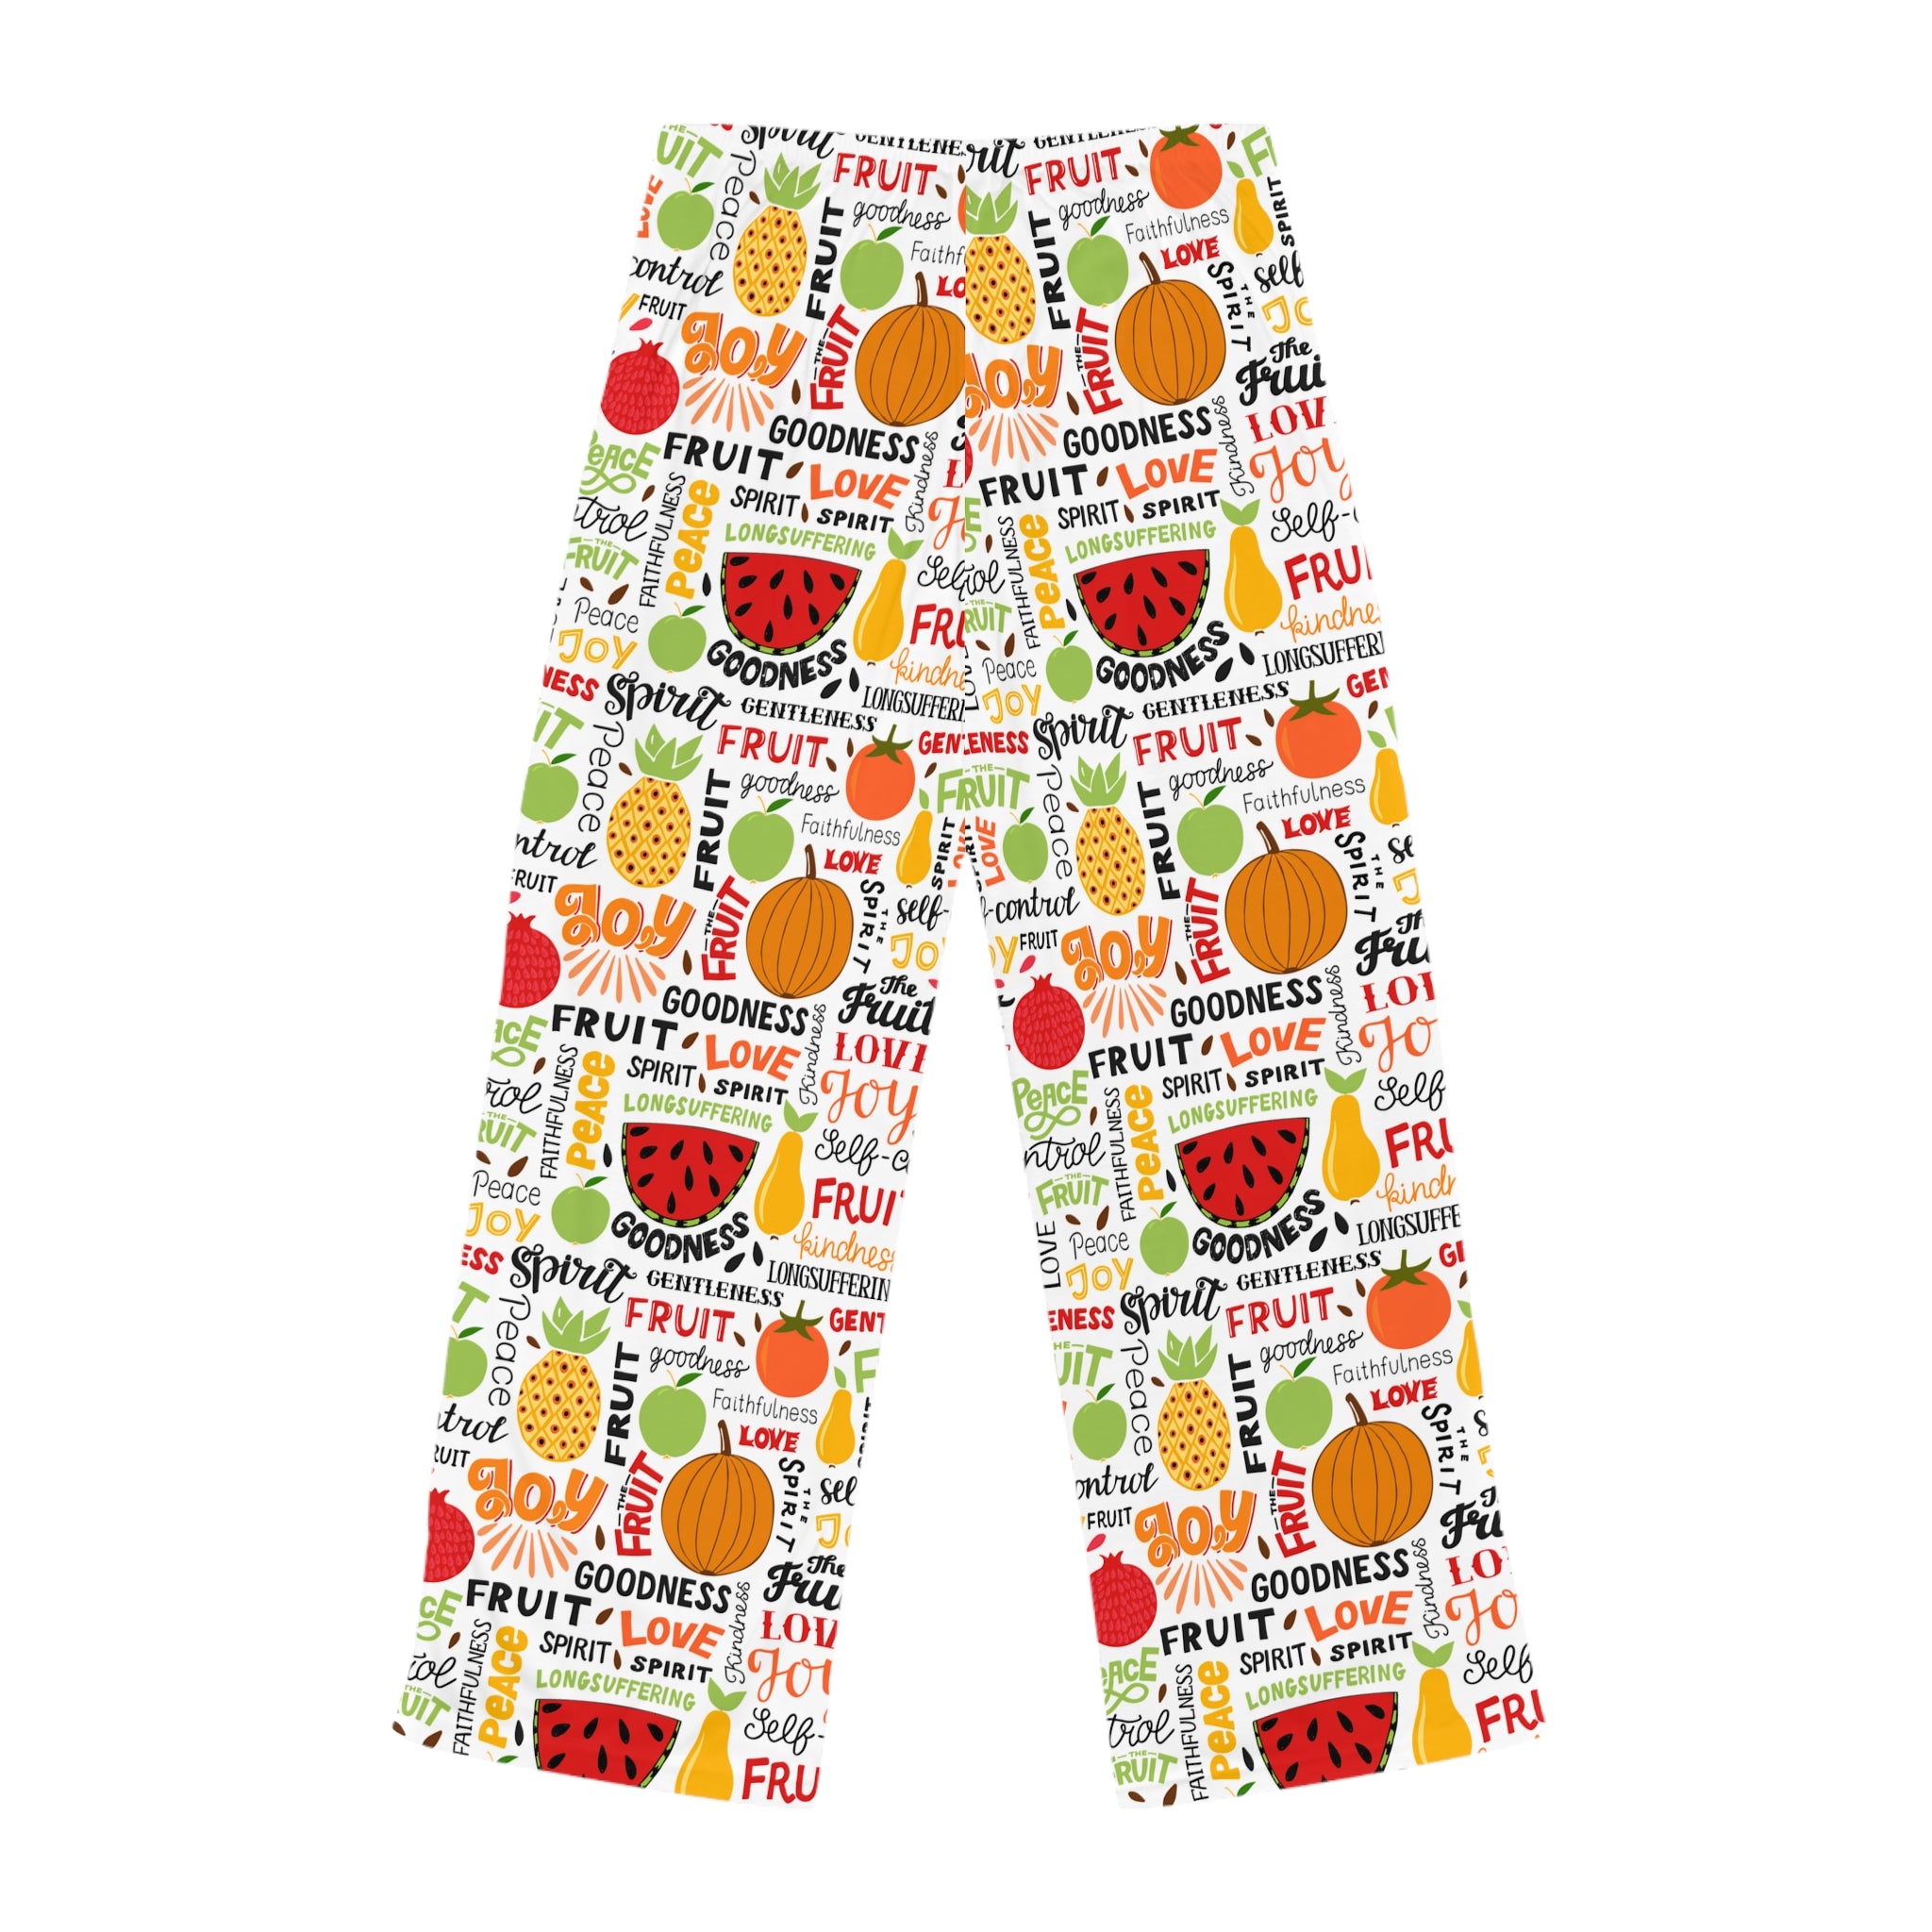 Fruit of the Spirit Women's Lounge / Pajama Pants - Matching Pajama Set and Indoor Slippers Available Size: XS Color: White stitching Jesus Passion Apparel